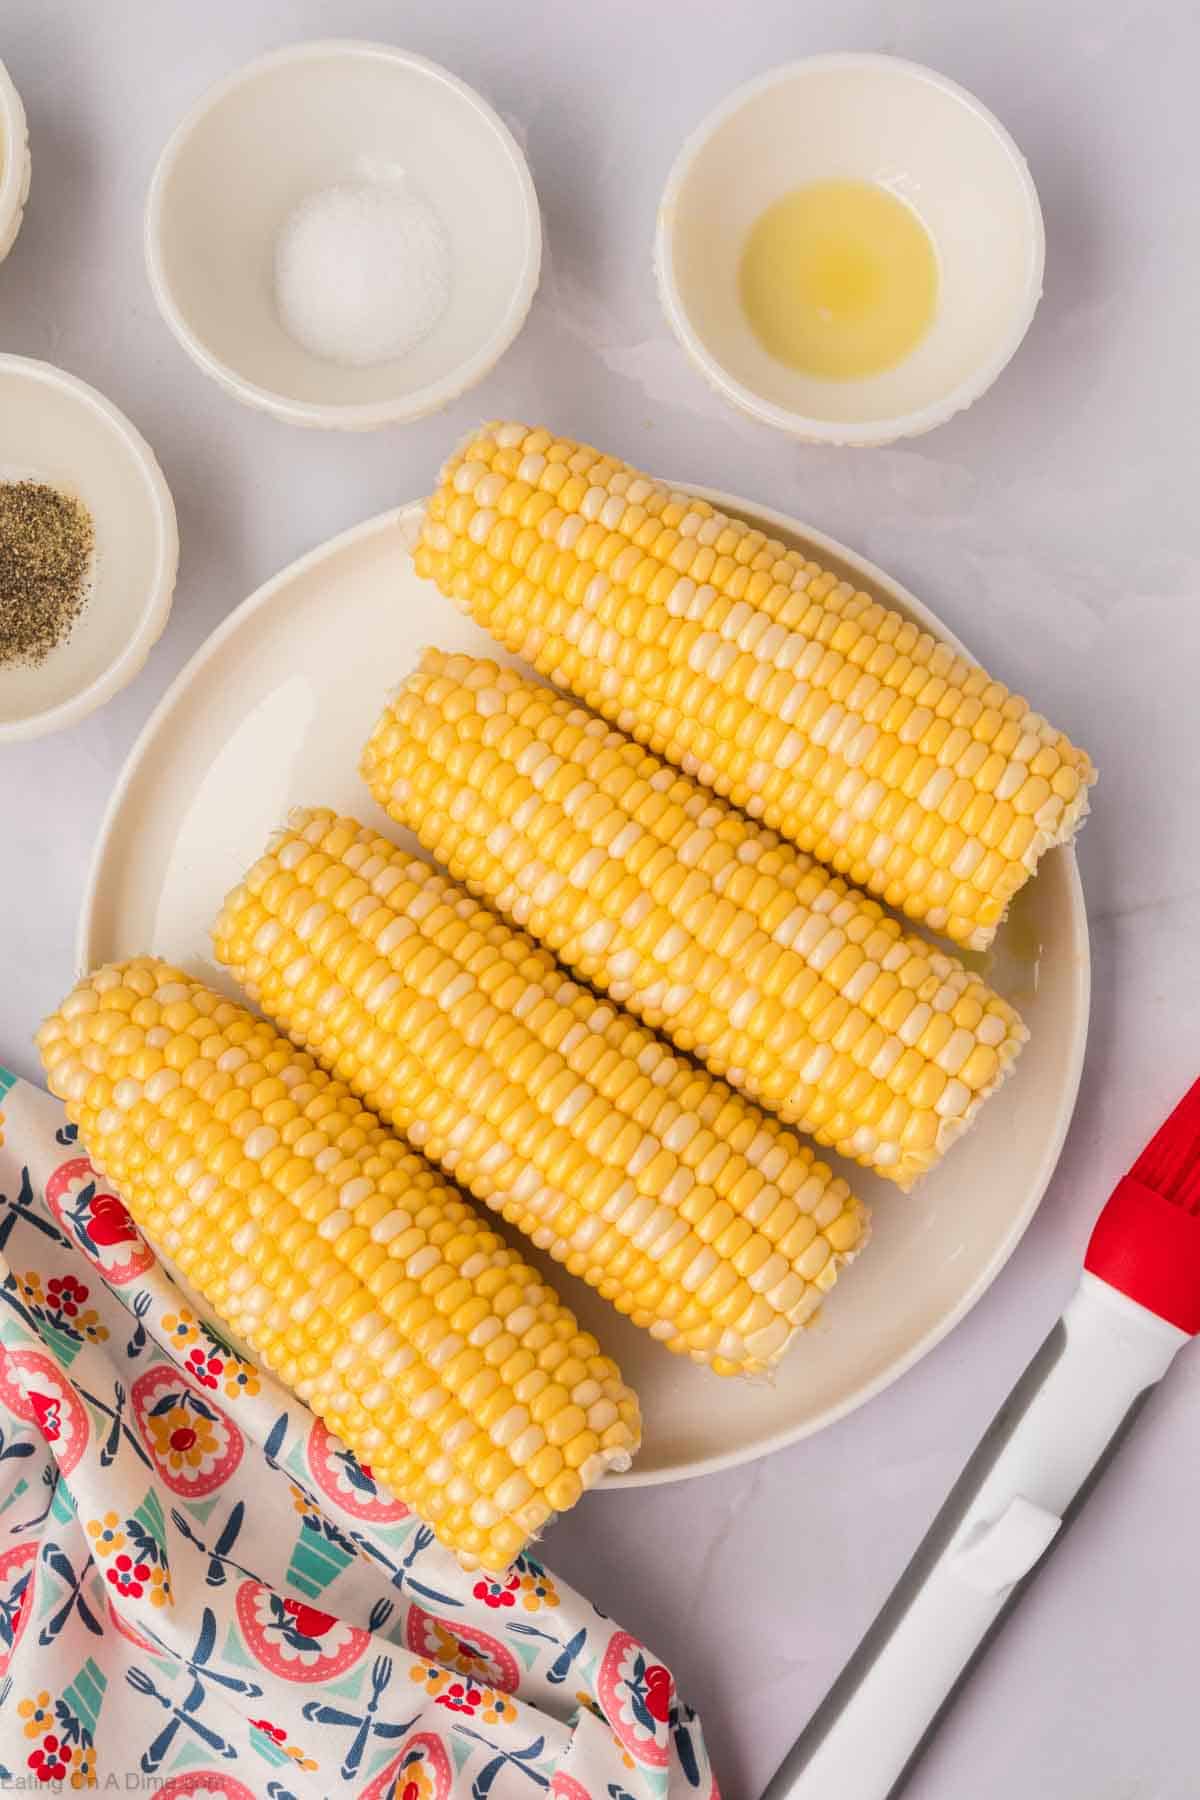 Four ears of Air Fryer Corn on the Cob are arranged on a round white plate. Surrounding the plate are small white bowls containing salt, pepper, butter, and oil. A decorative cloth and red brush are placed near the bottom of the image.